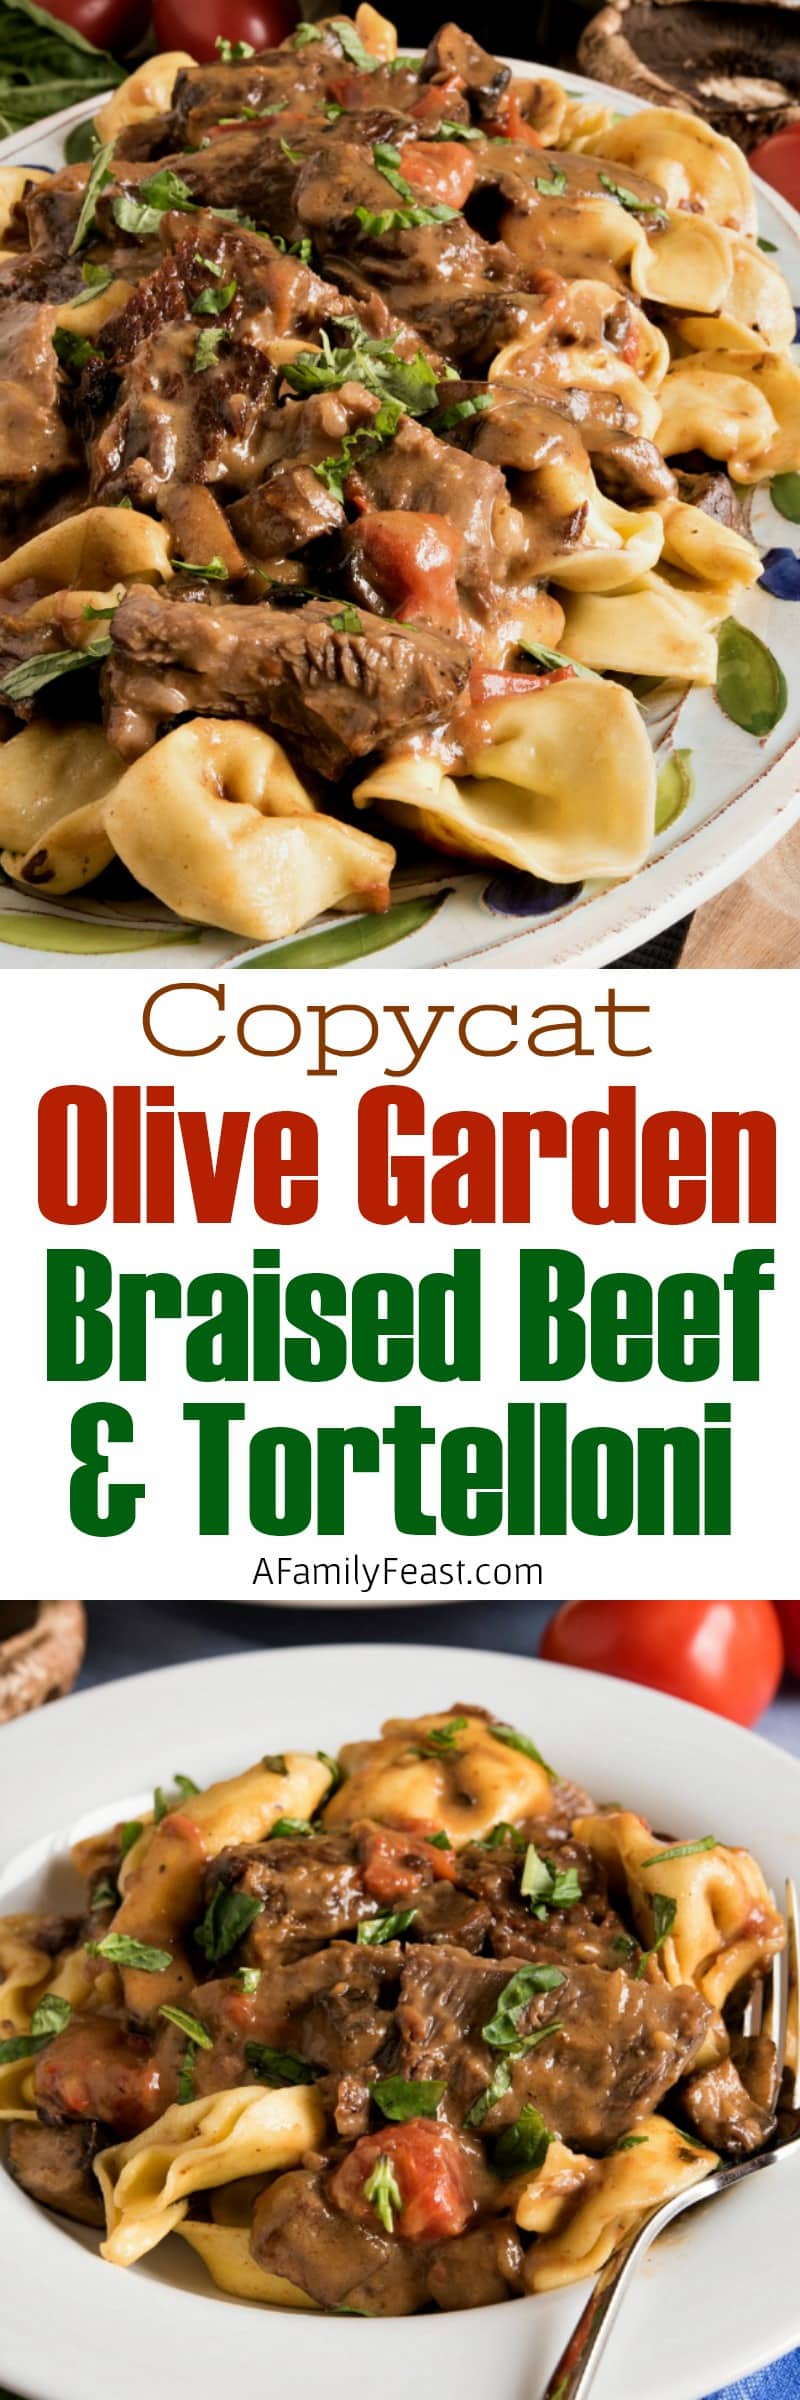 Braised Beef and Tortelloni 